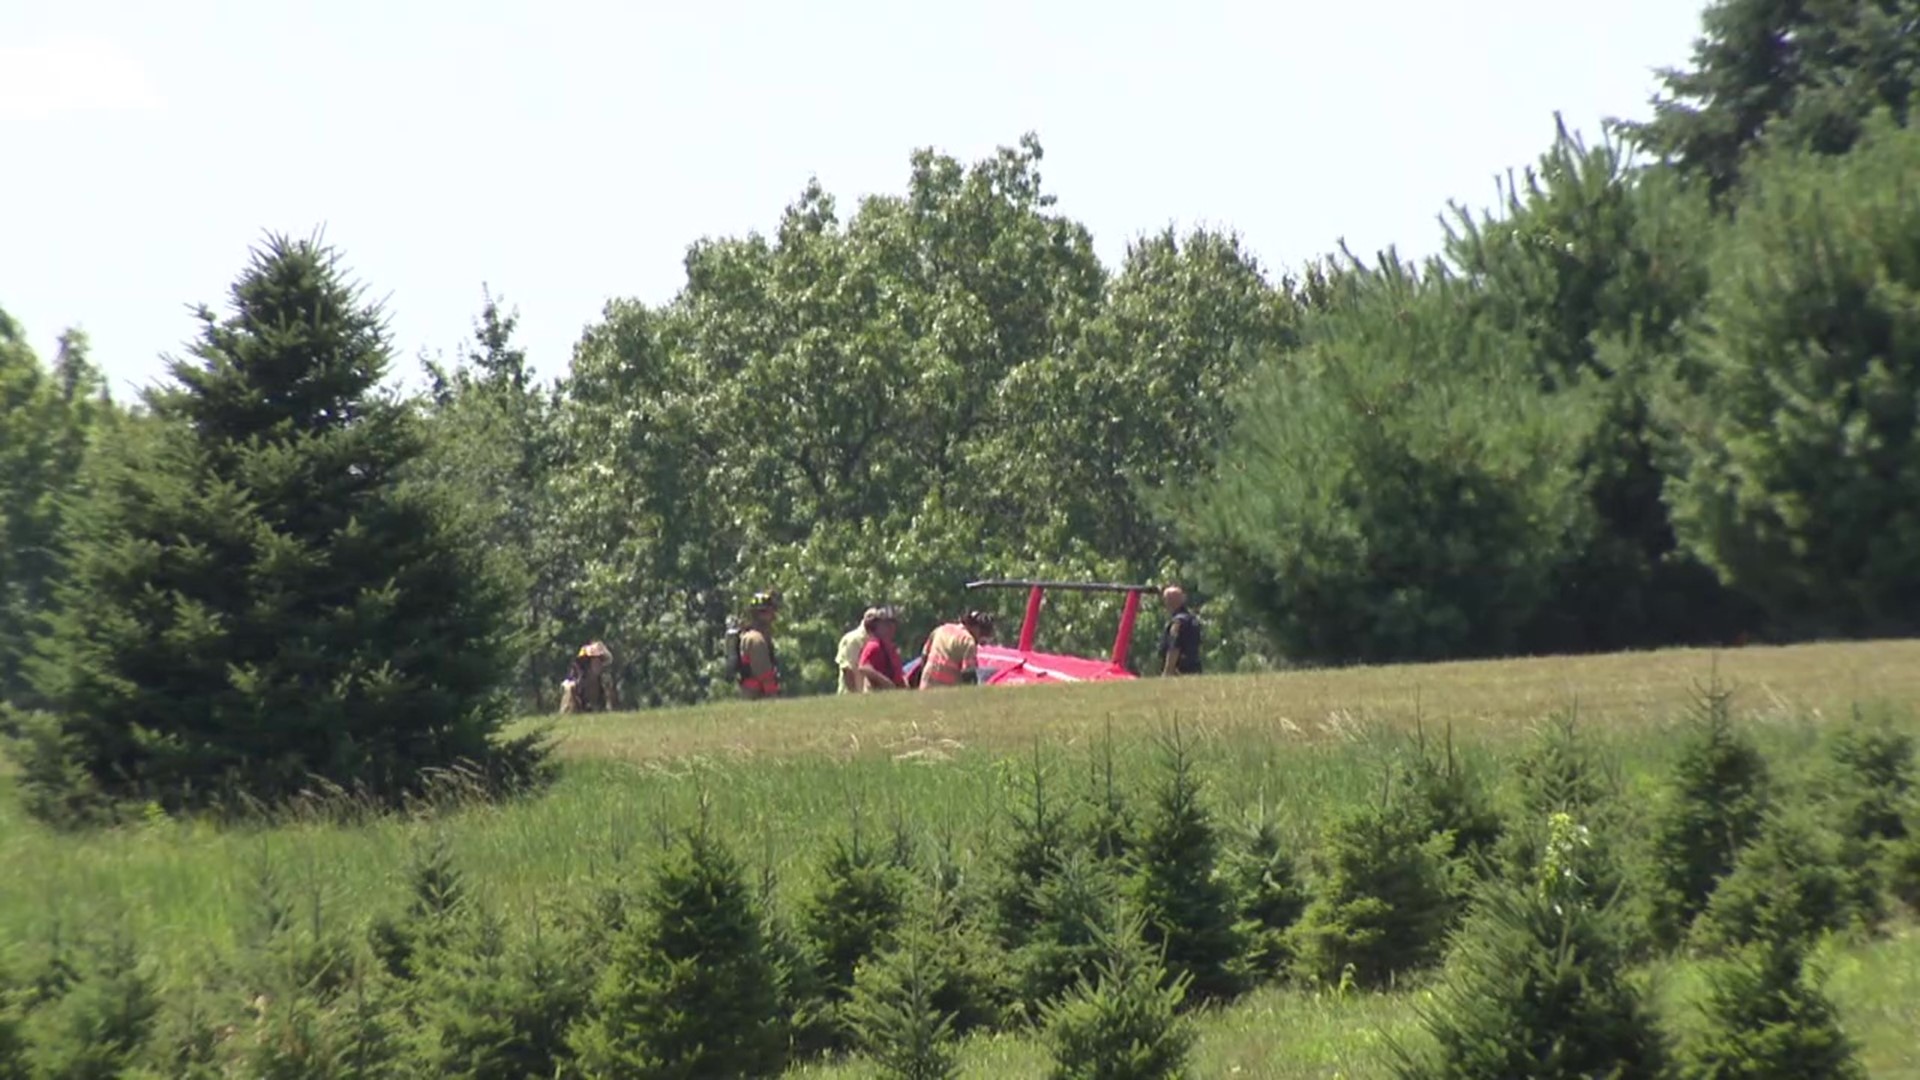 Three people were in the helicopter at the time, one was taken to the hospital with a shoulder injury.